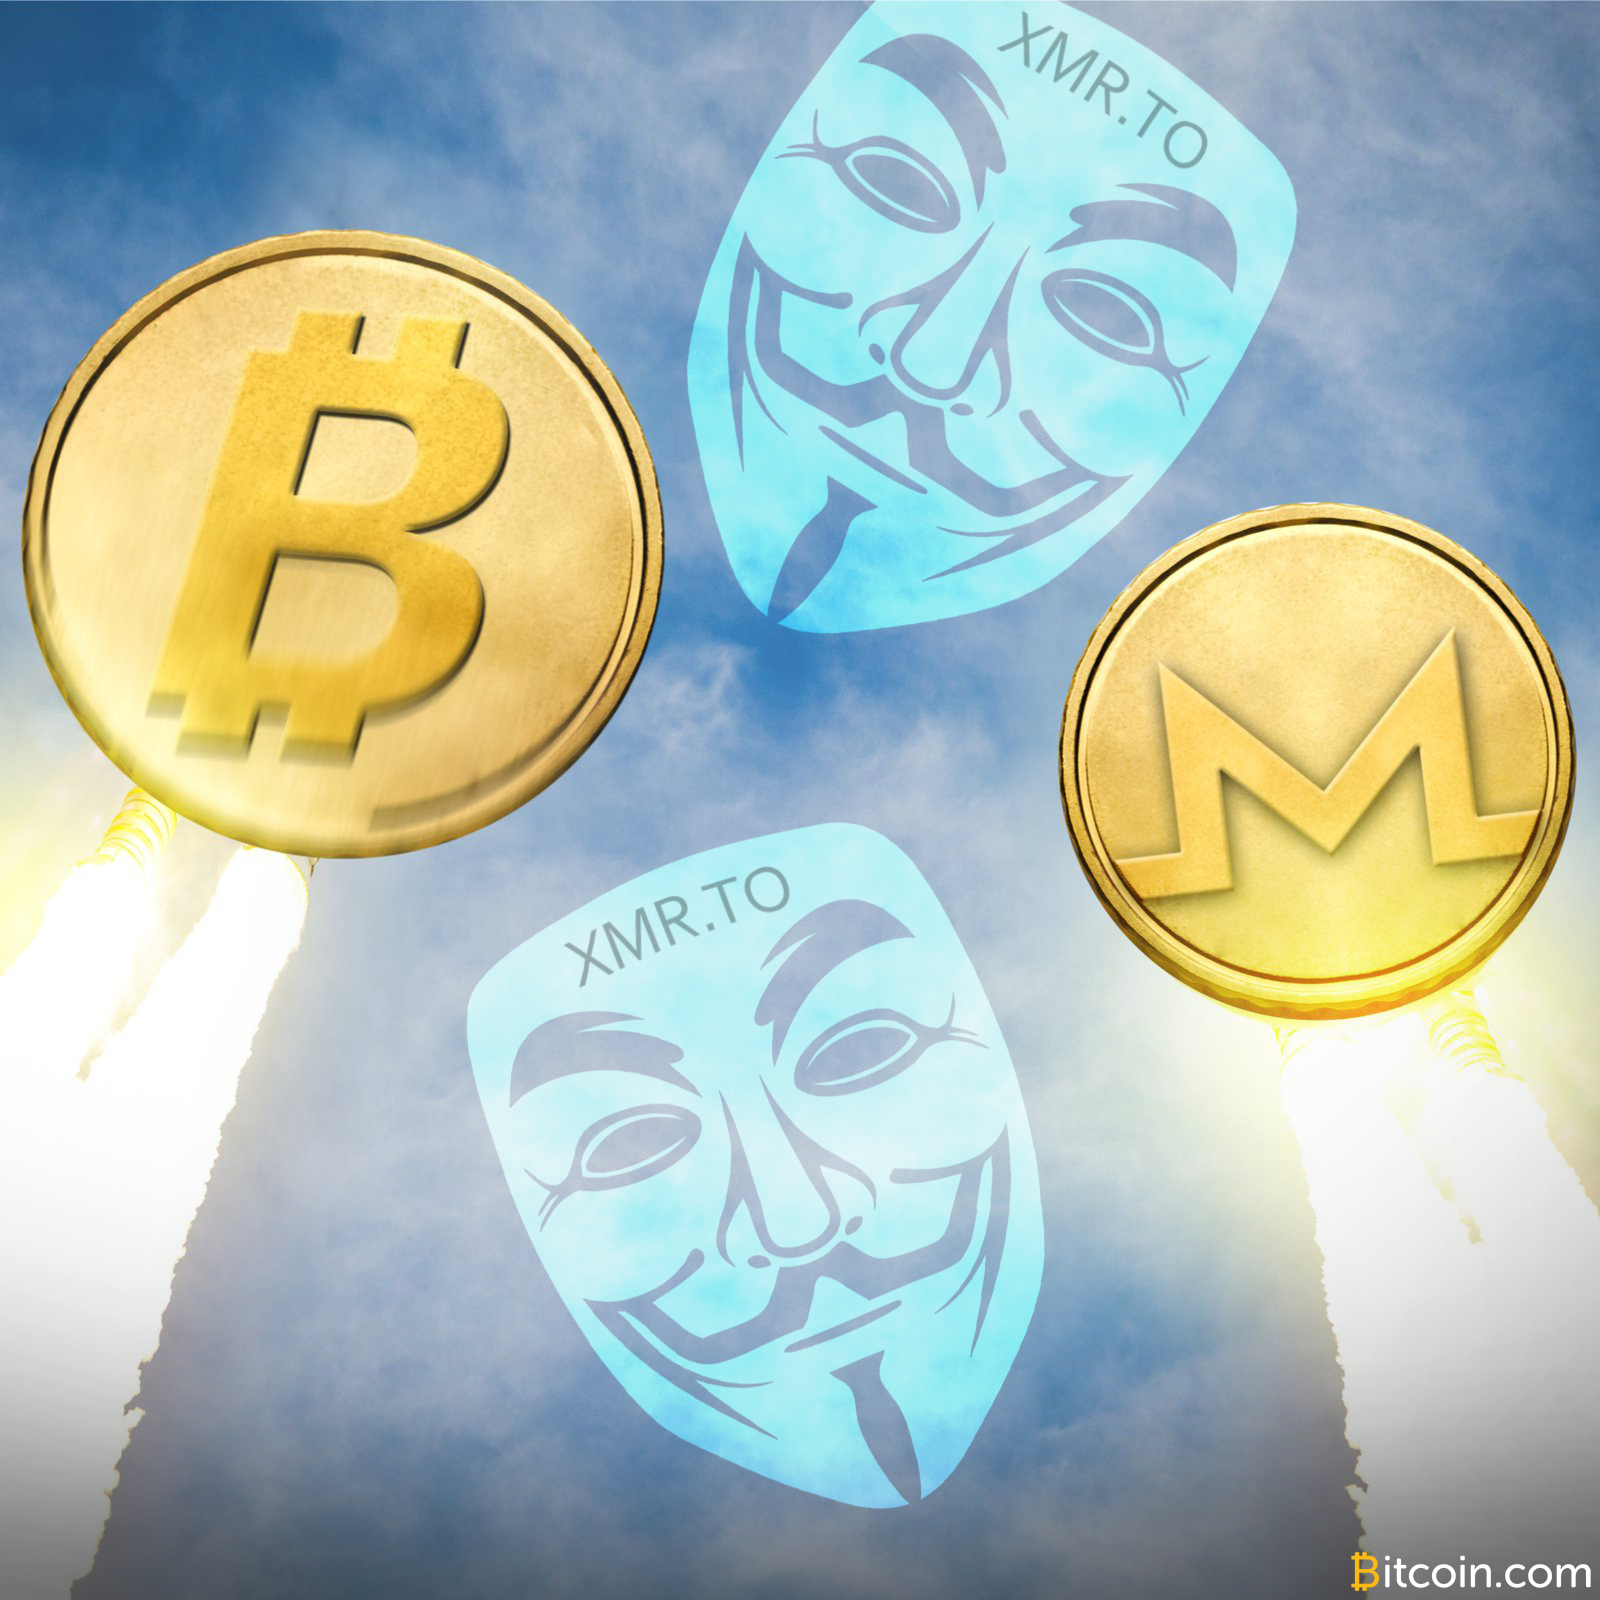 Xmr.to Claims to Offer Fully Anonymous Bitcoin Transactions